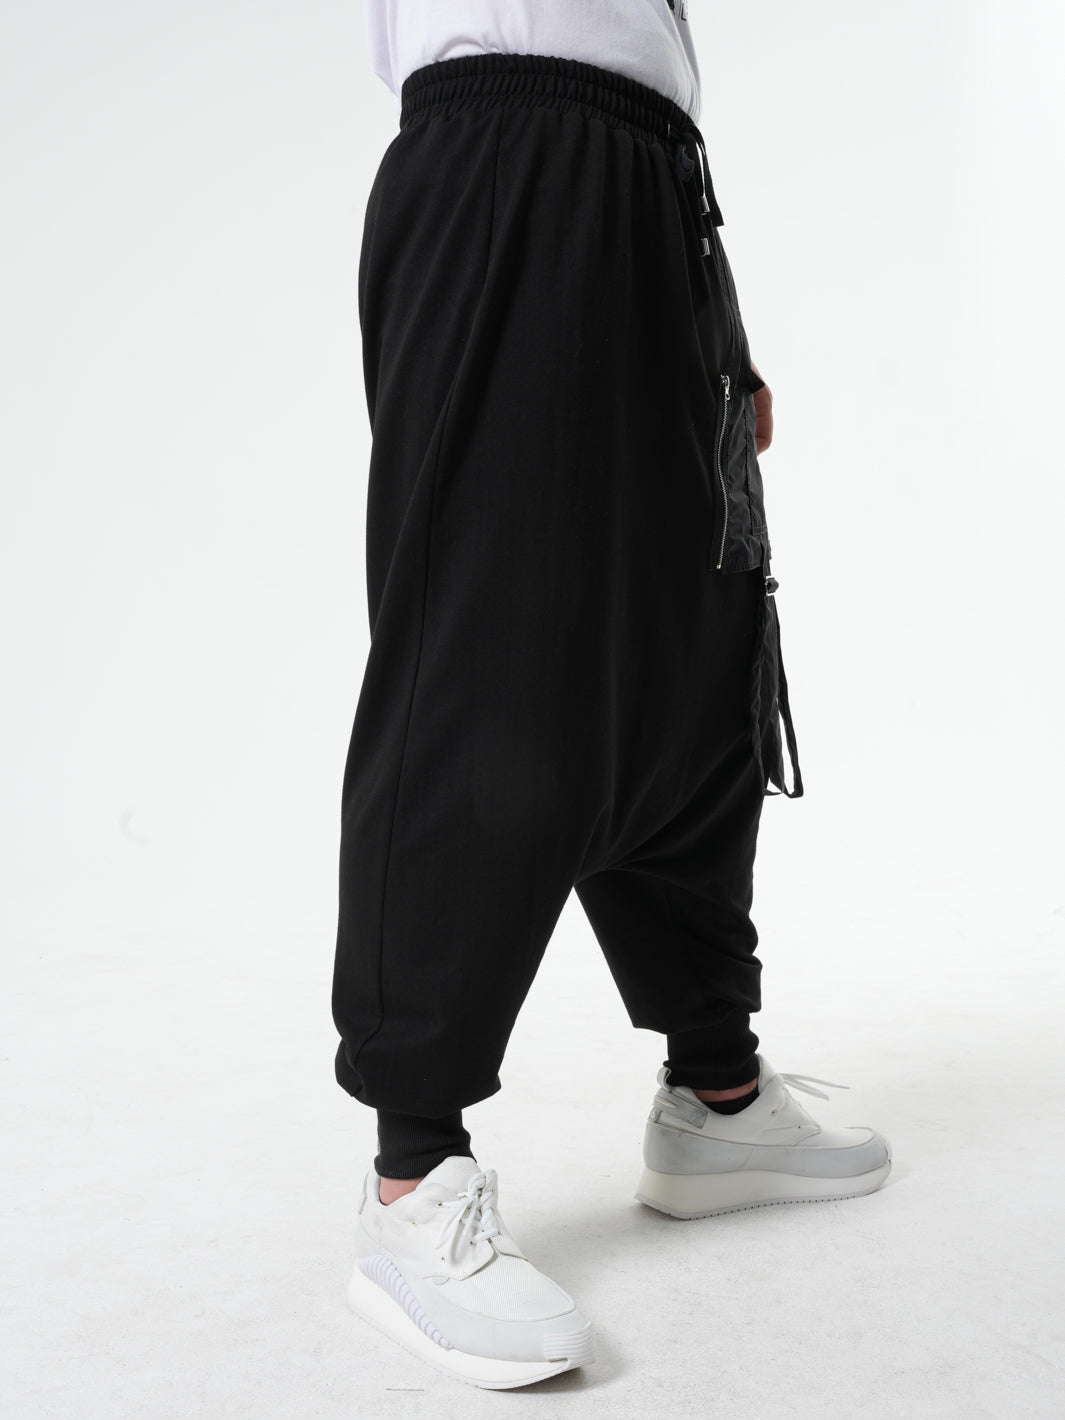 Mens Baggy Pants with Pocket